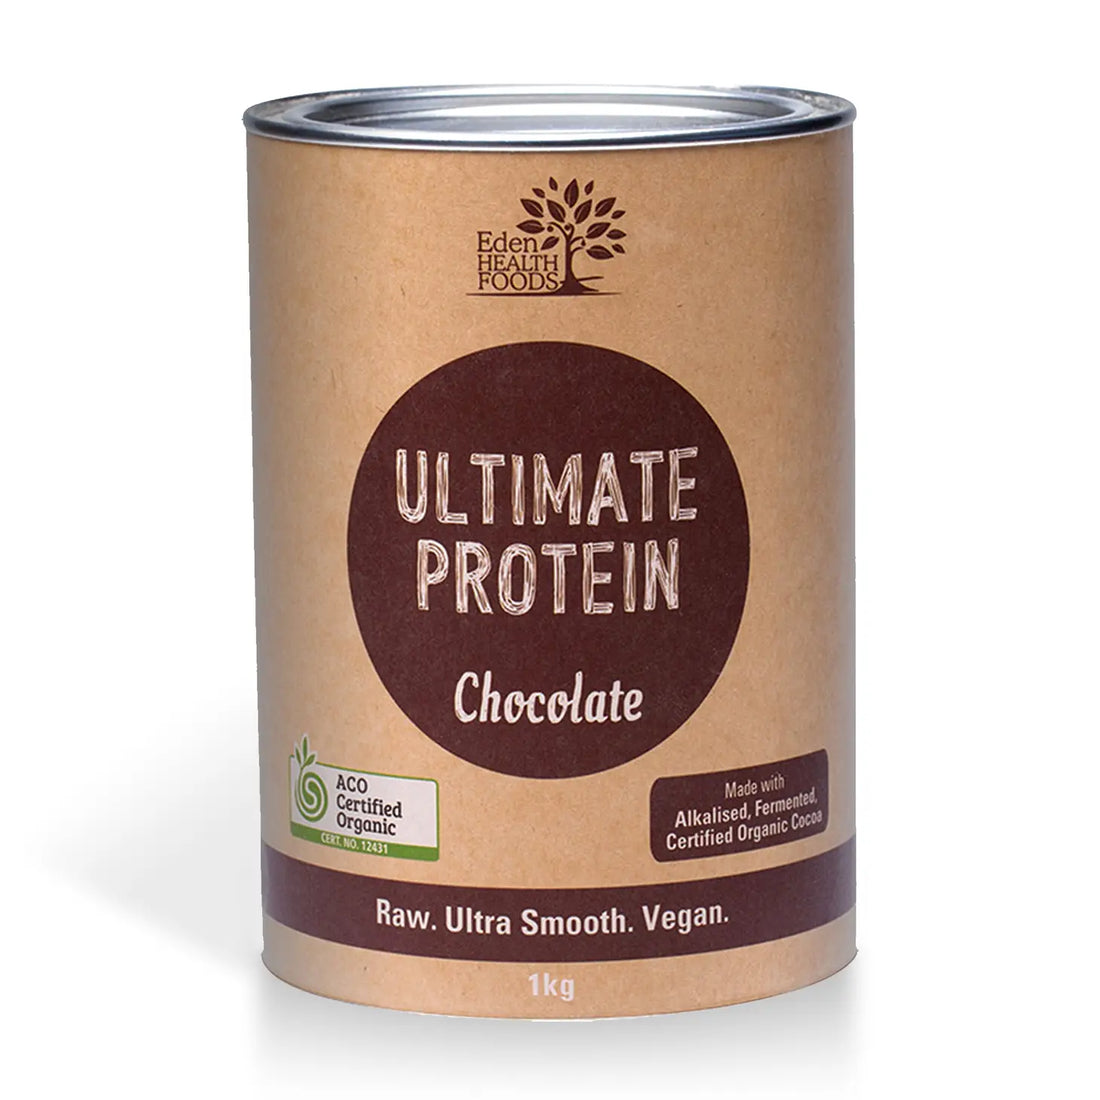 Ultimate Protein (Chocolate)